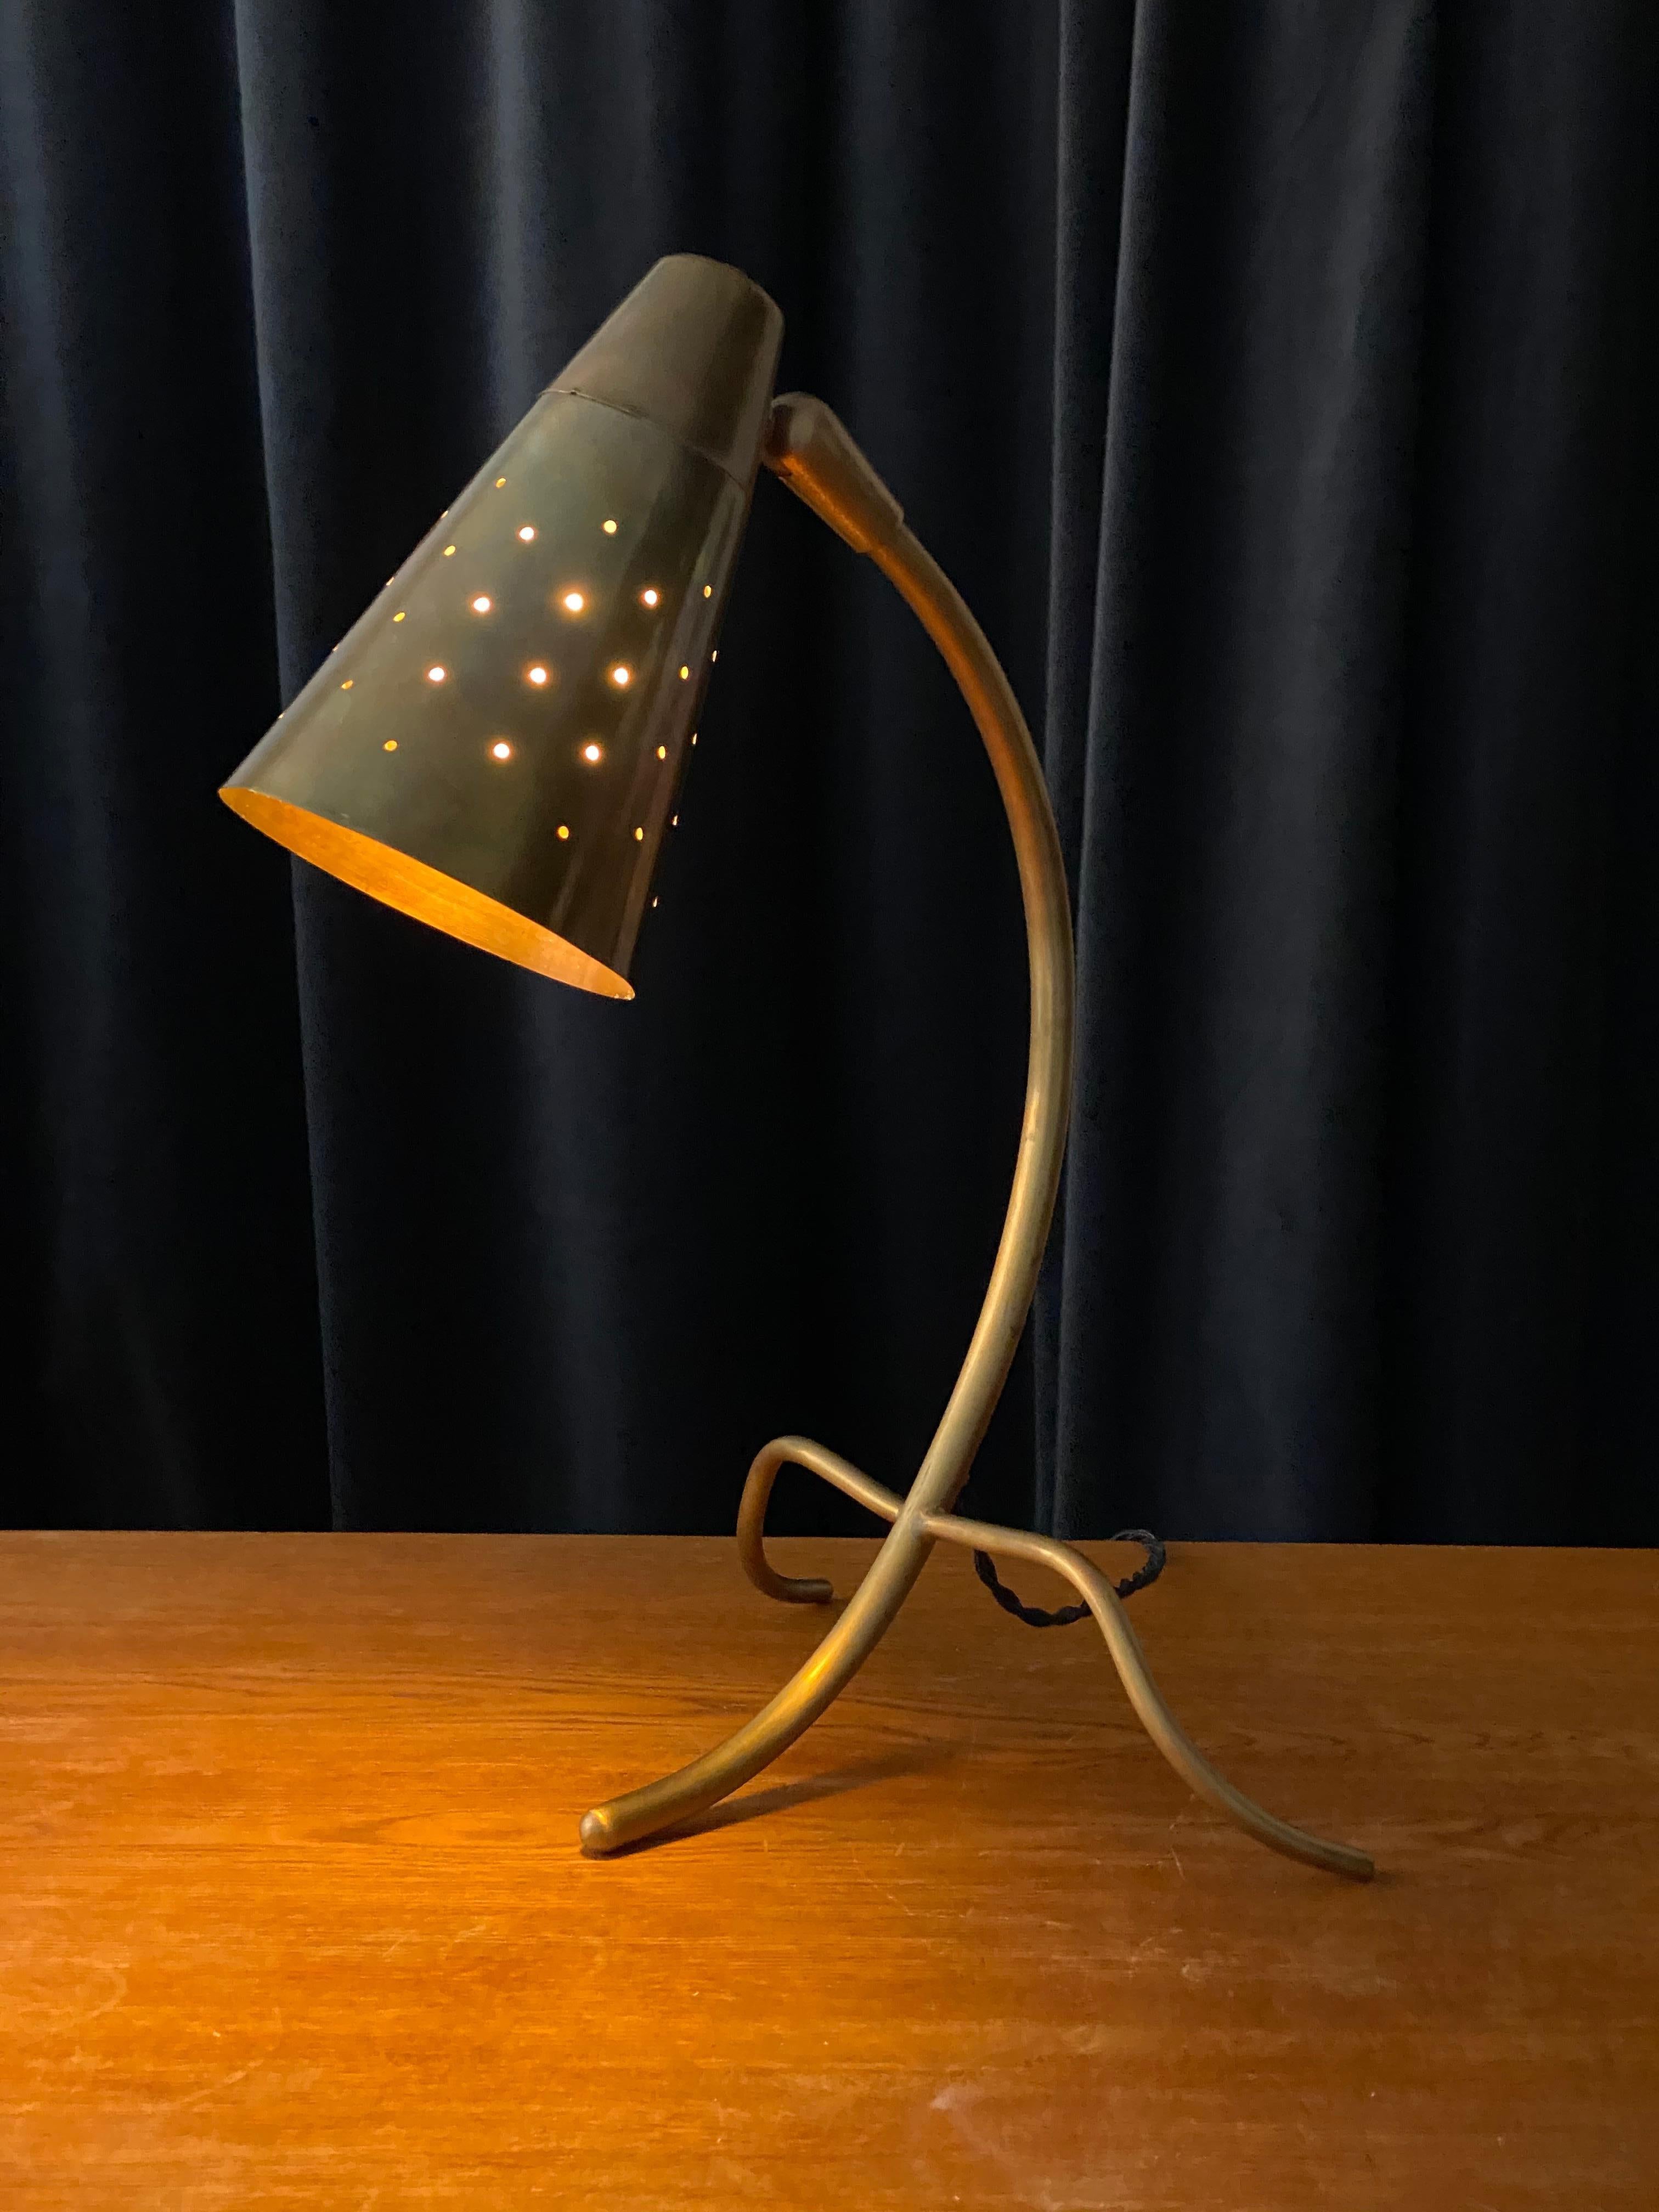 An early modernist table lamp. Designed by an unknown danish designer. In a highly artistic style blended with a functionalist expression.

Other designers of the period include Vilhelm Lauritzen, Frits Schlegel, Paavo Tynell, Hans Bergström, and